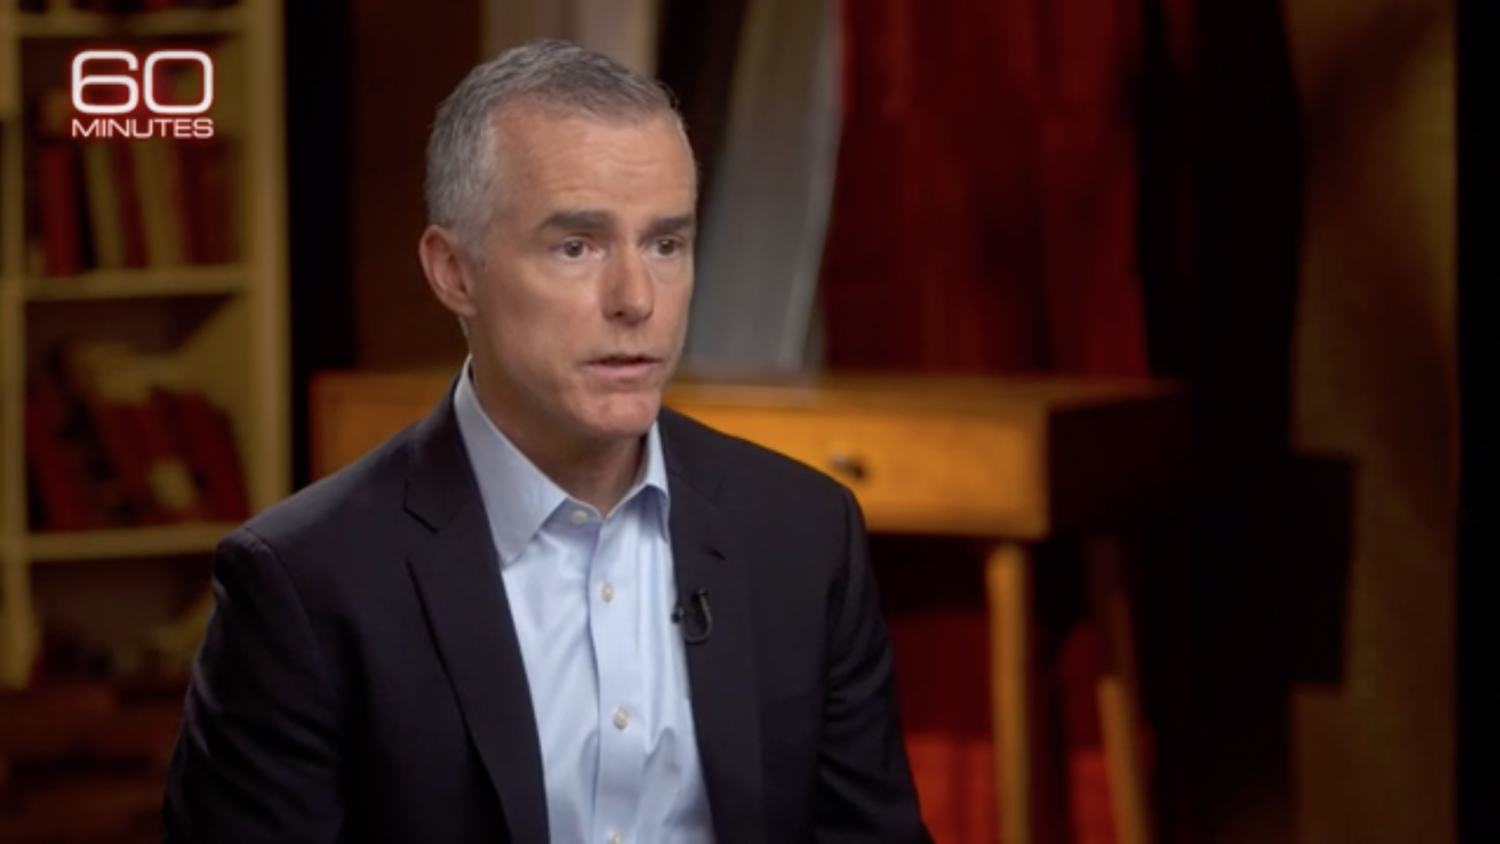 McCabe’s Troubles Run Much Deeper Than ‘60 Minutes’ Interview Suggests